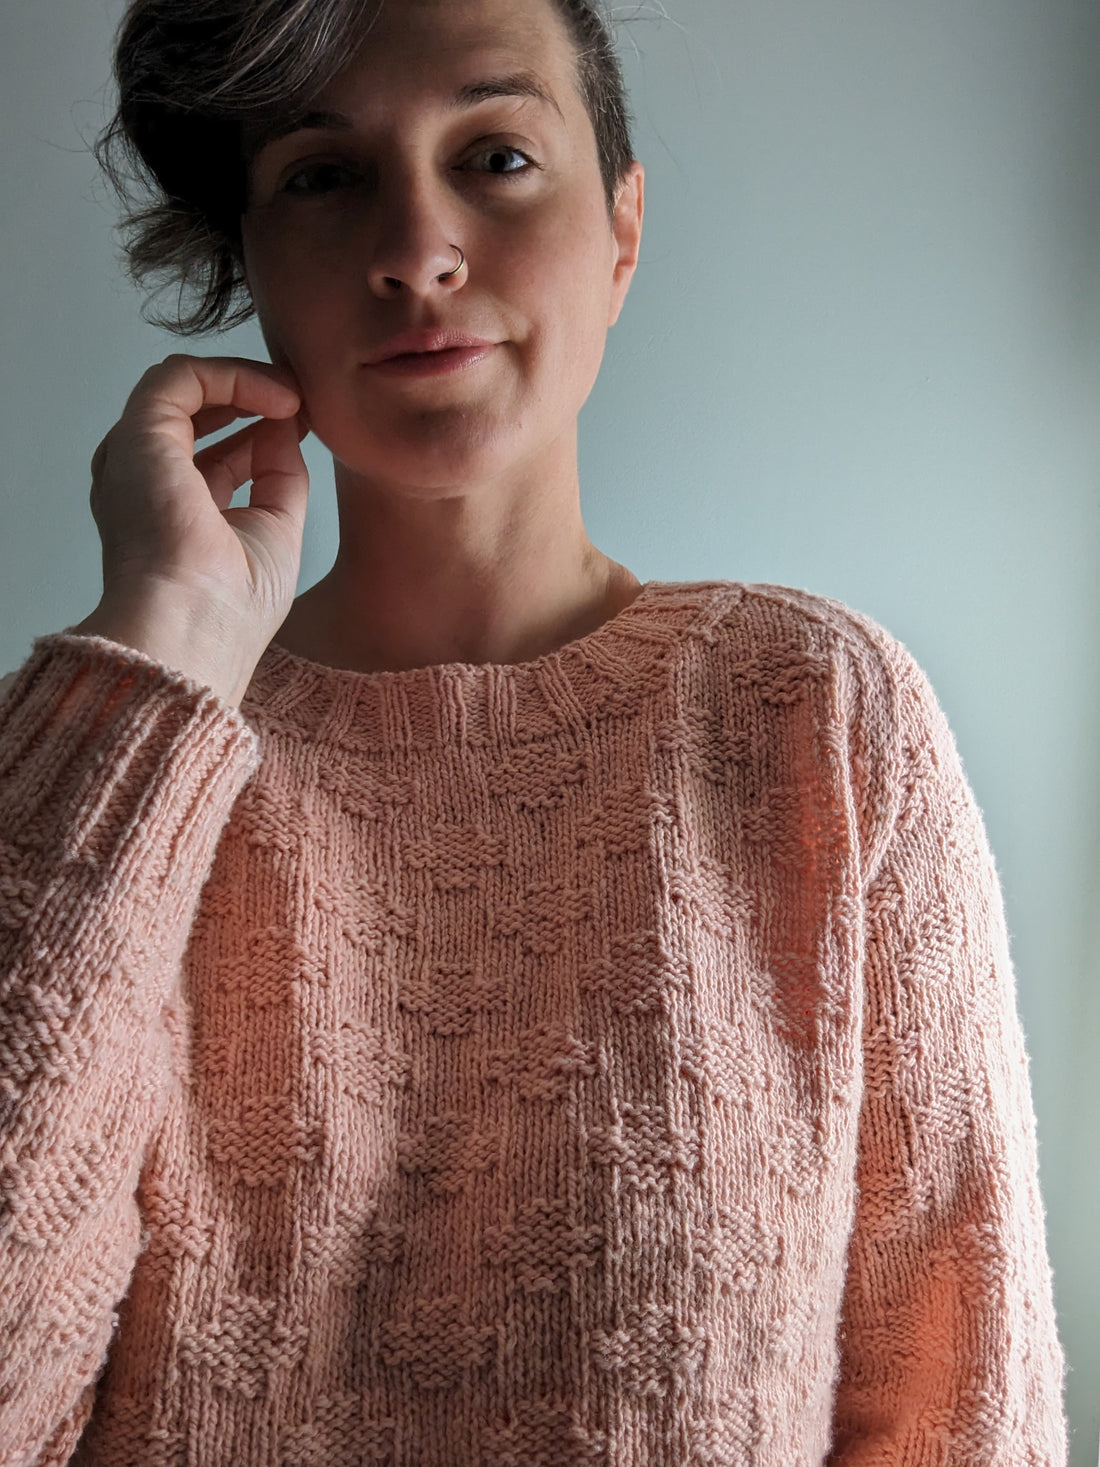 Jen looks at the camera, wearing a coral pink version of her Plusses sweater, knit using a textured plusses design instead of the colorwork pattern.